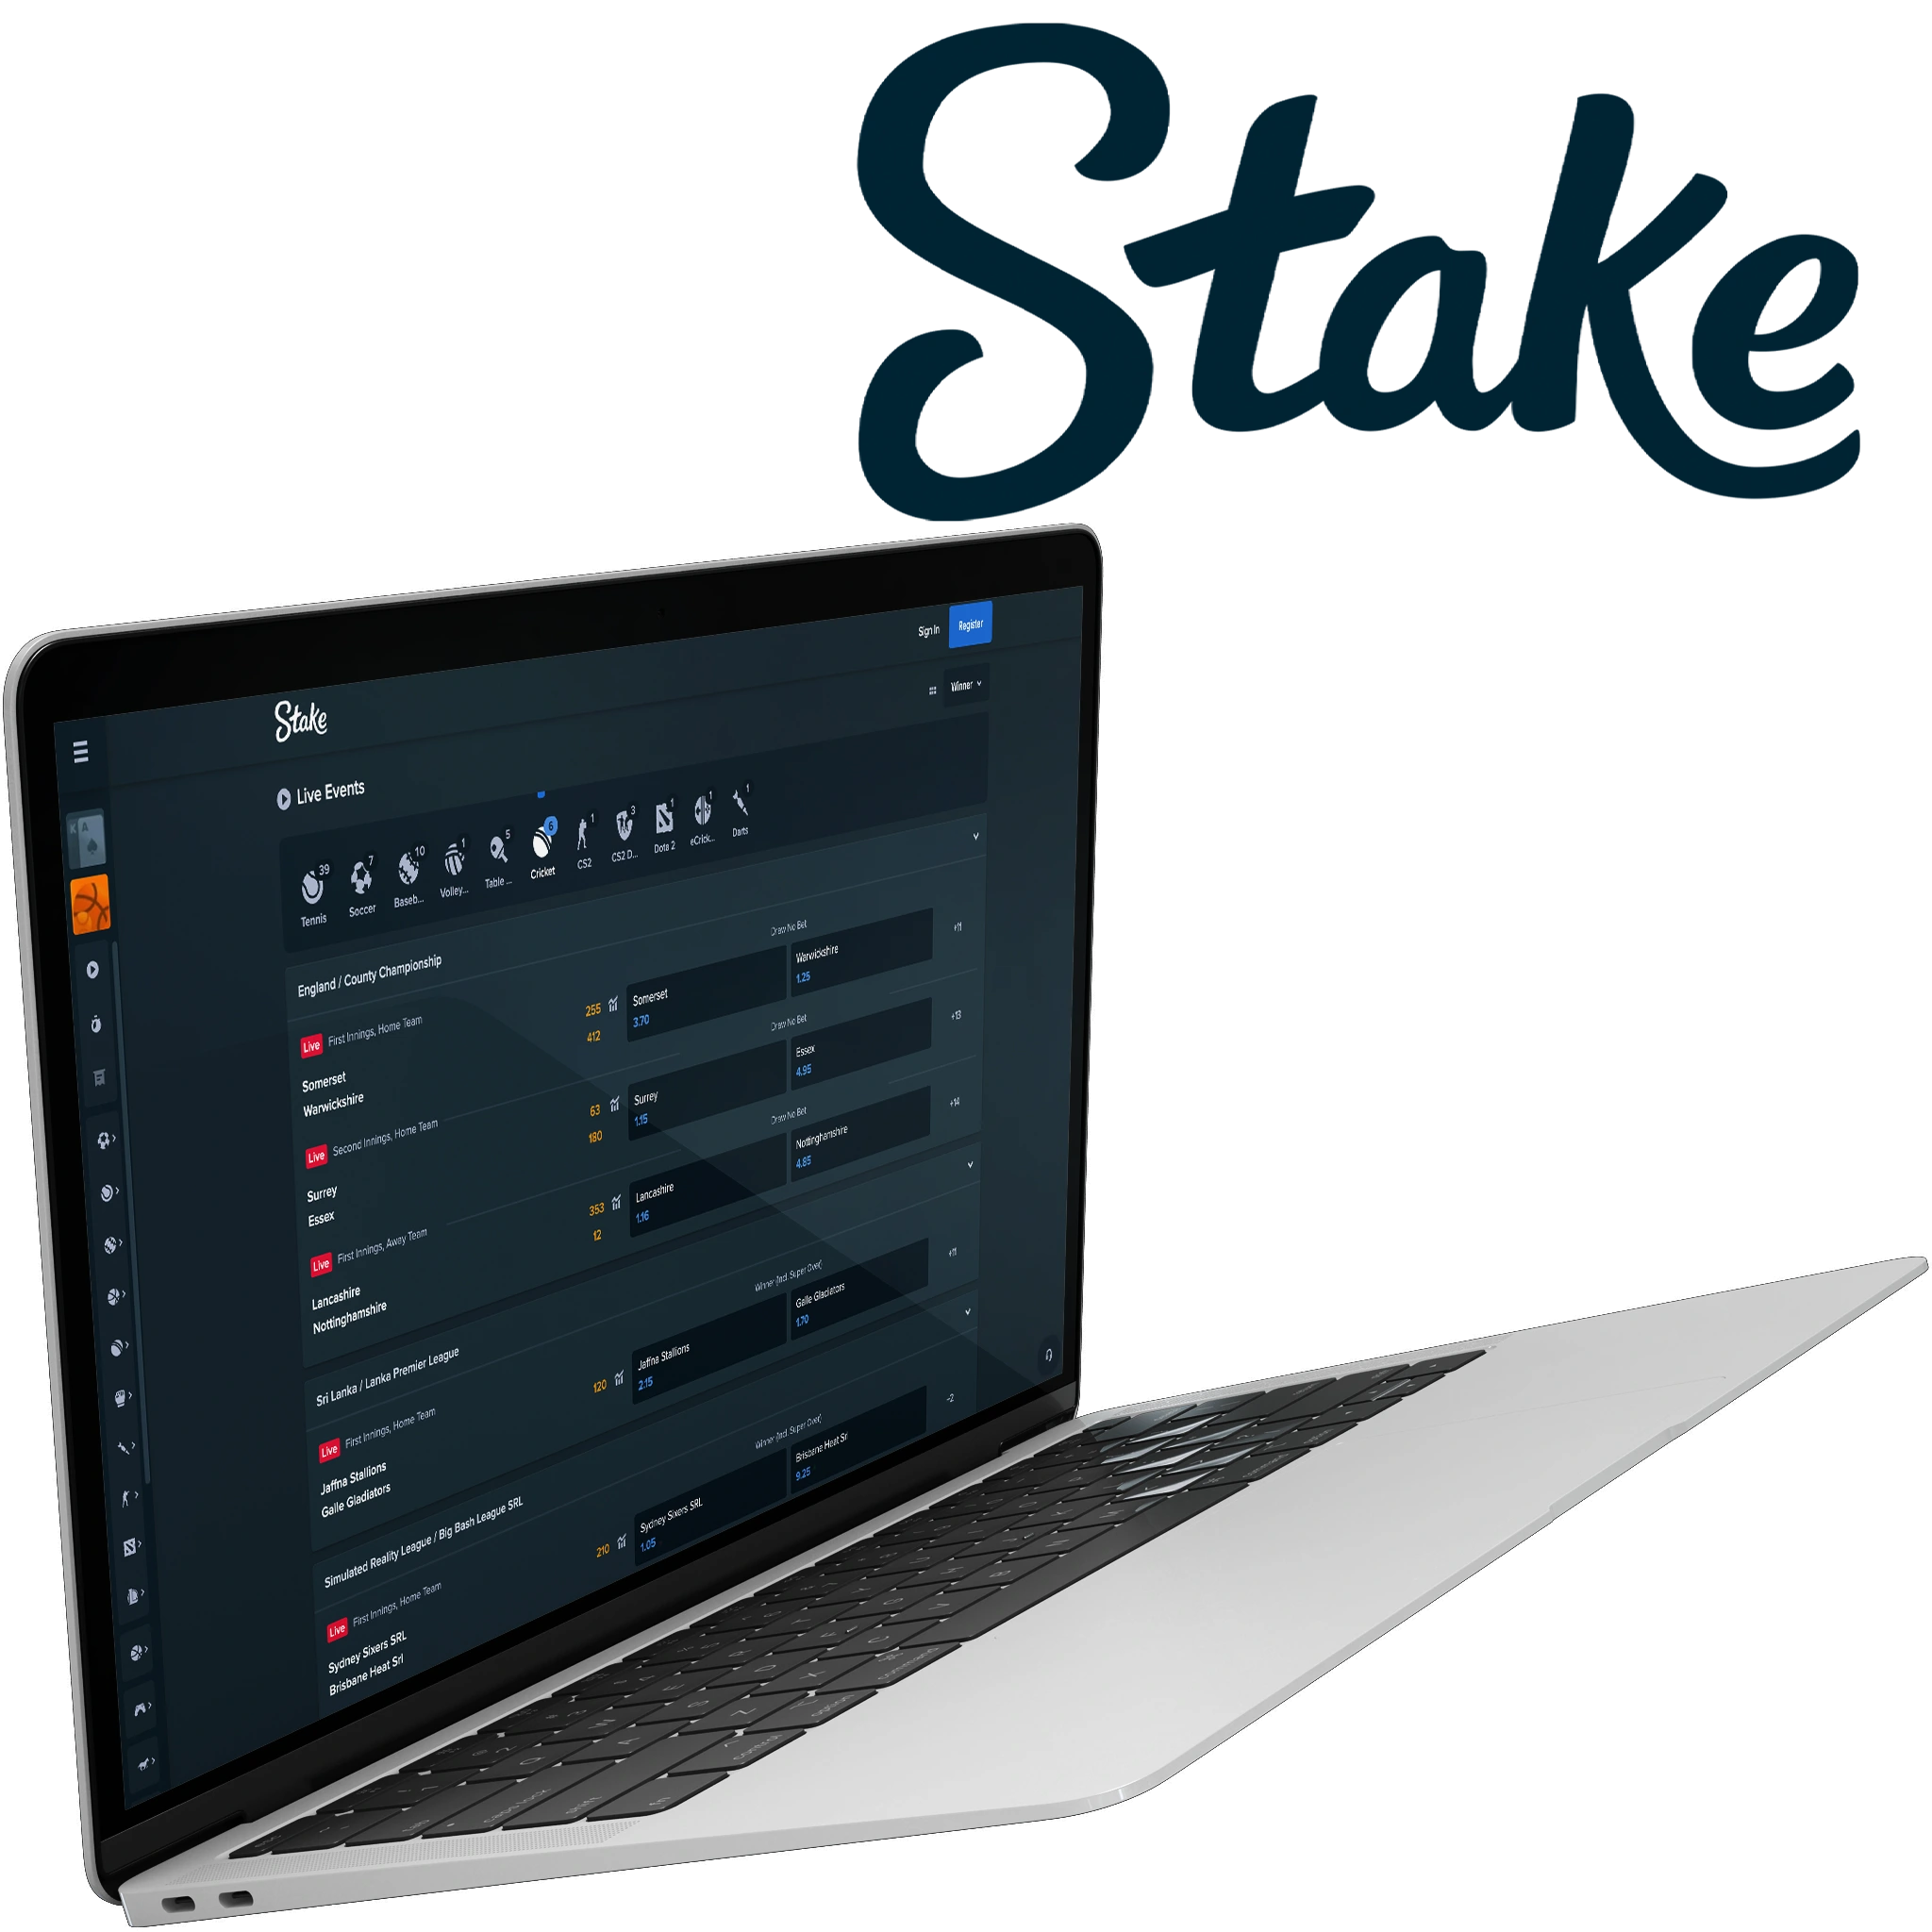 Stake is a secure gambling platform that will open up cricket betting to you from a new side.